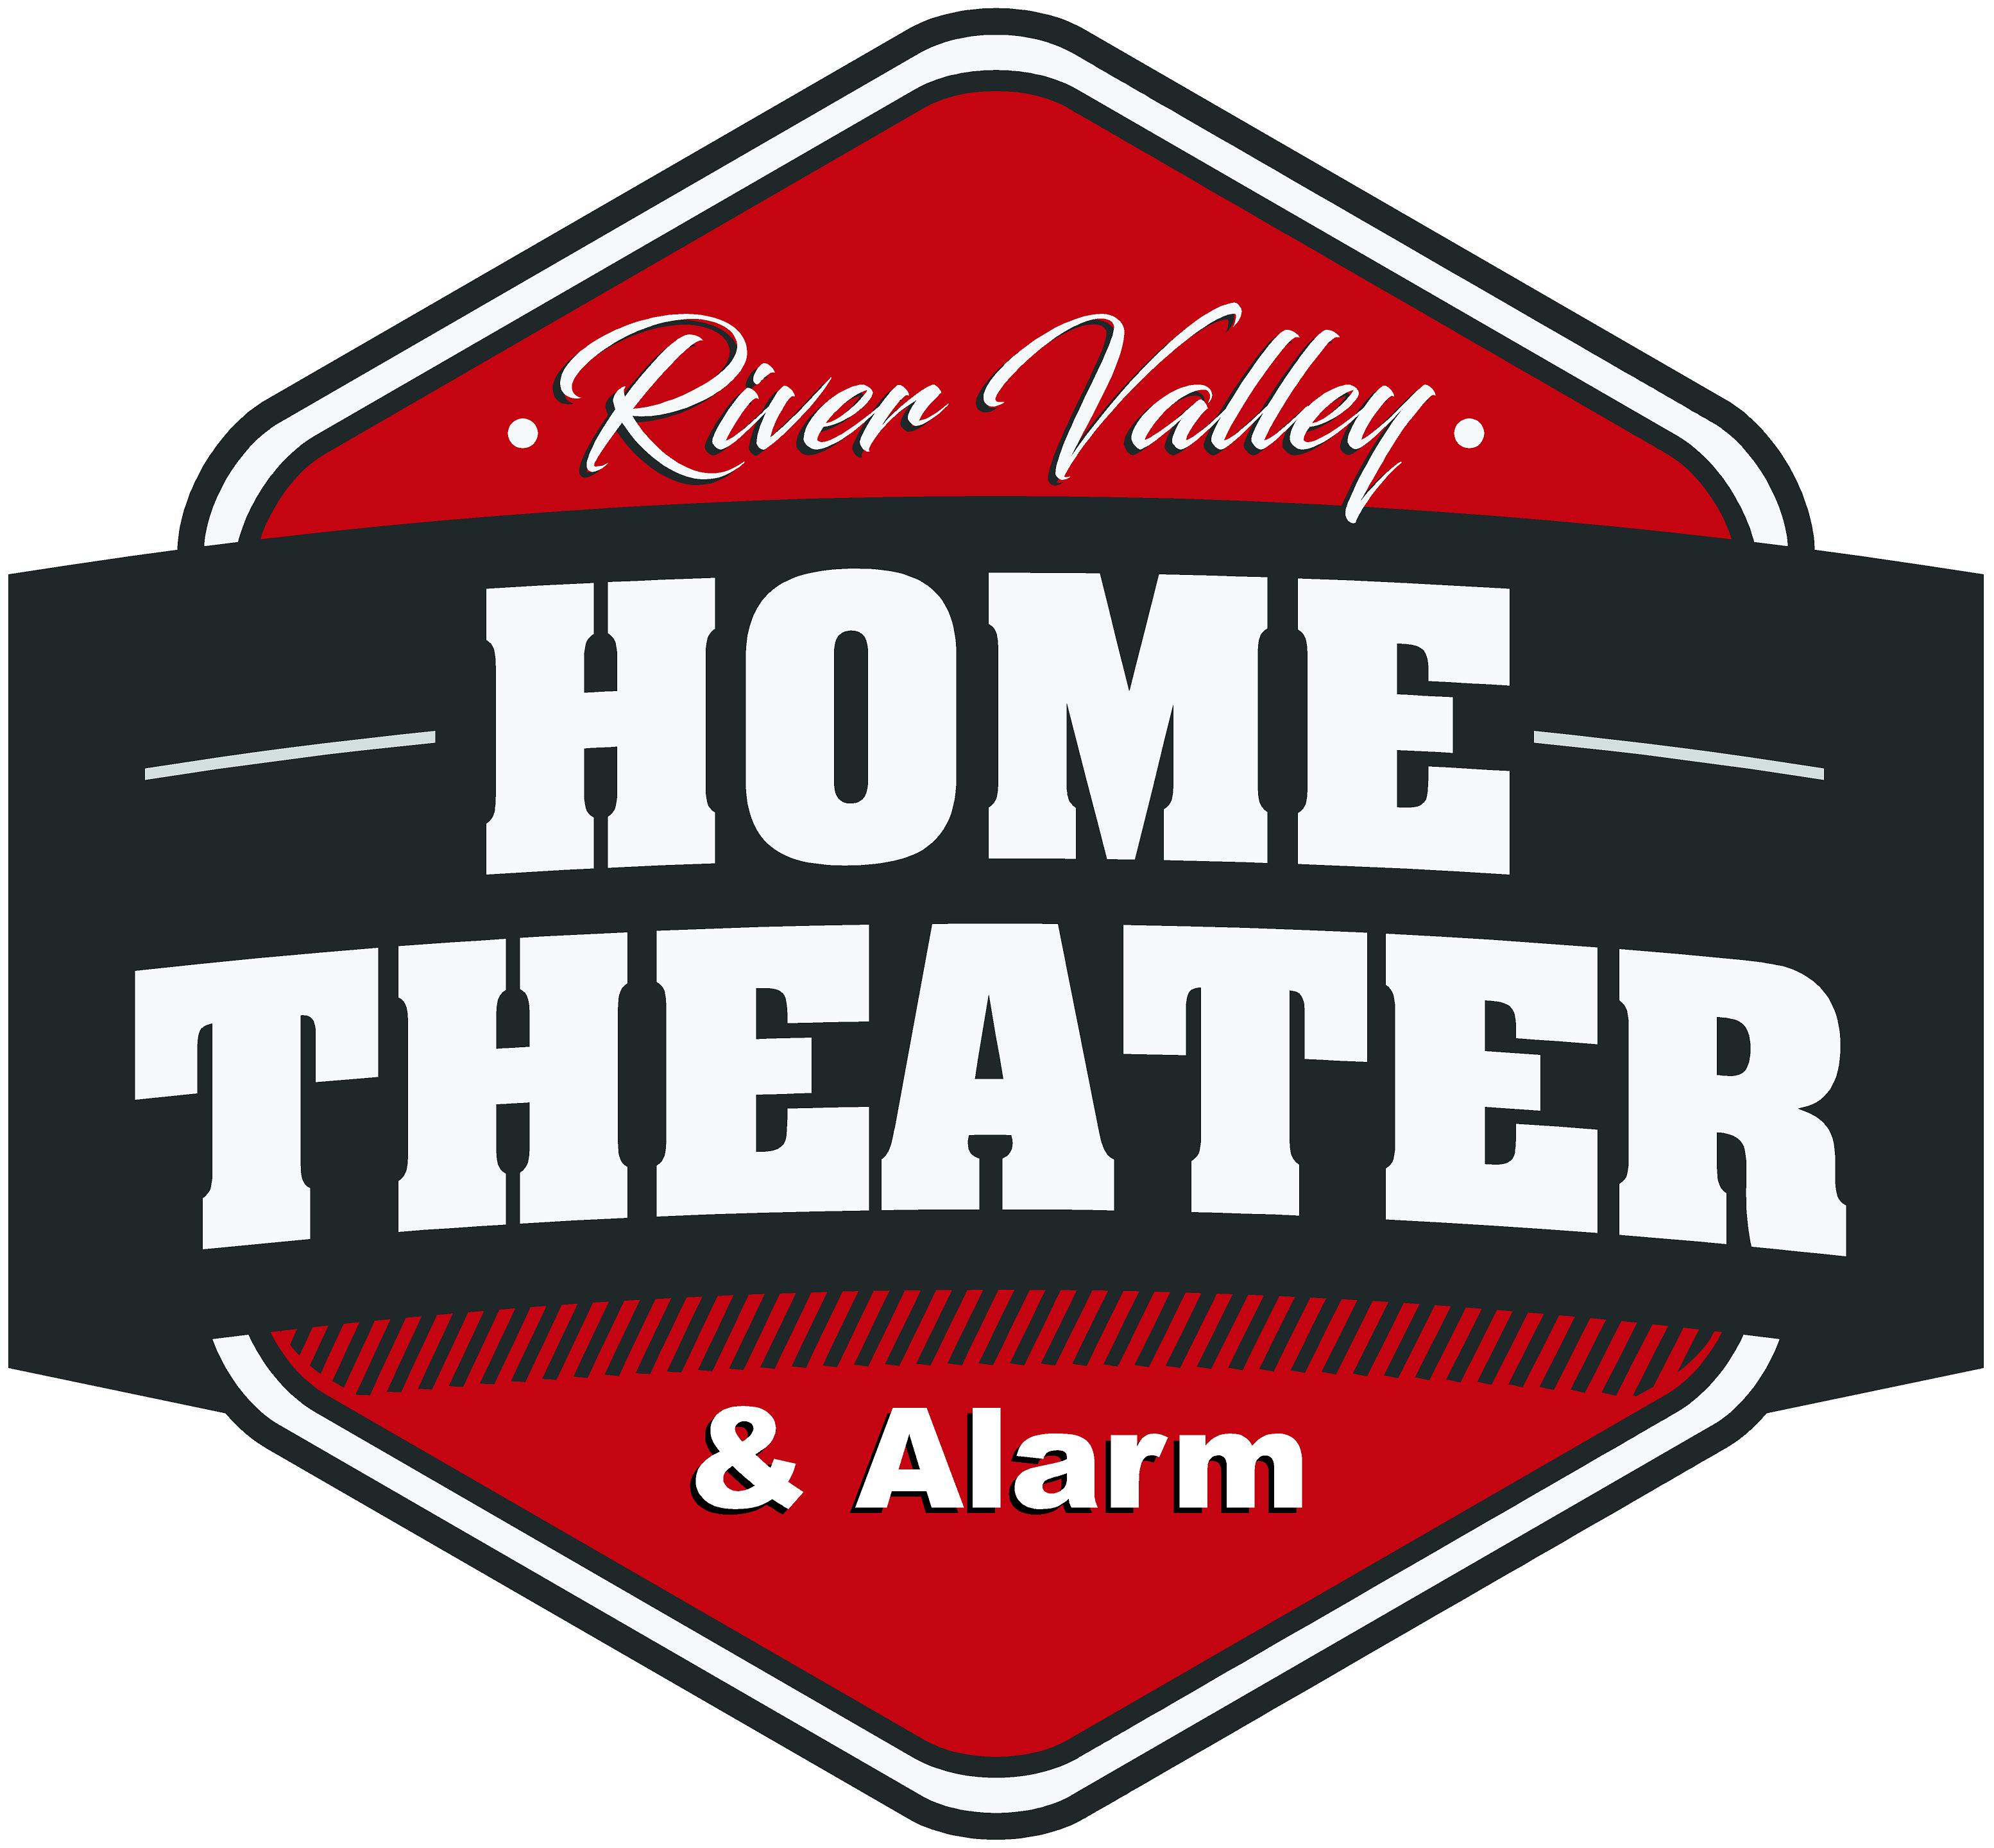 River Valley Home Theater